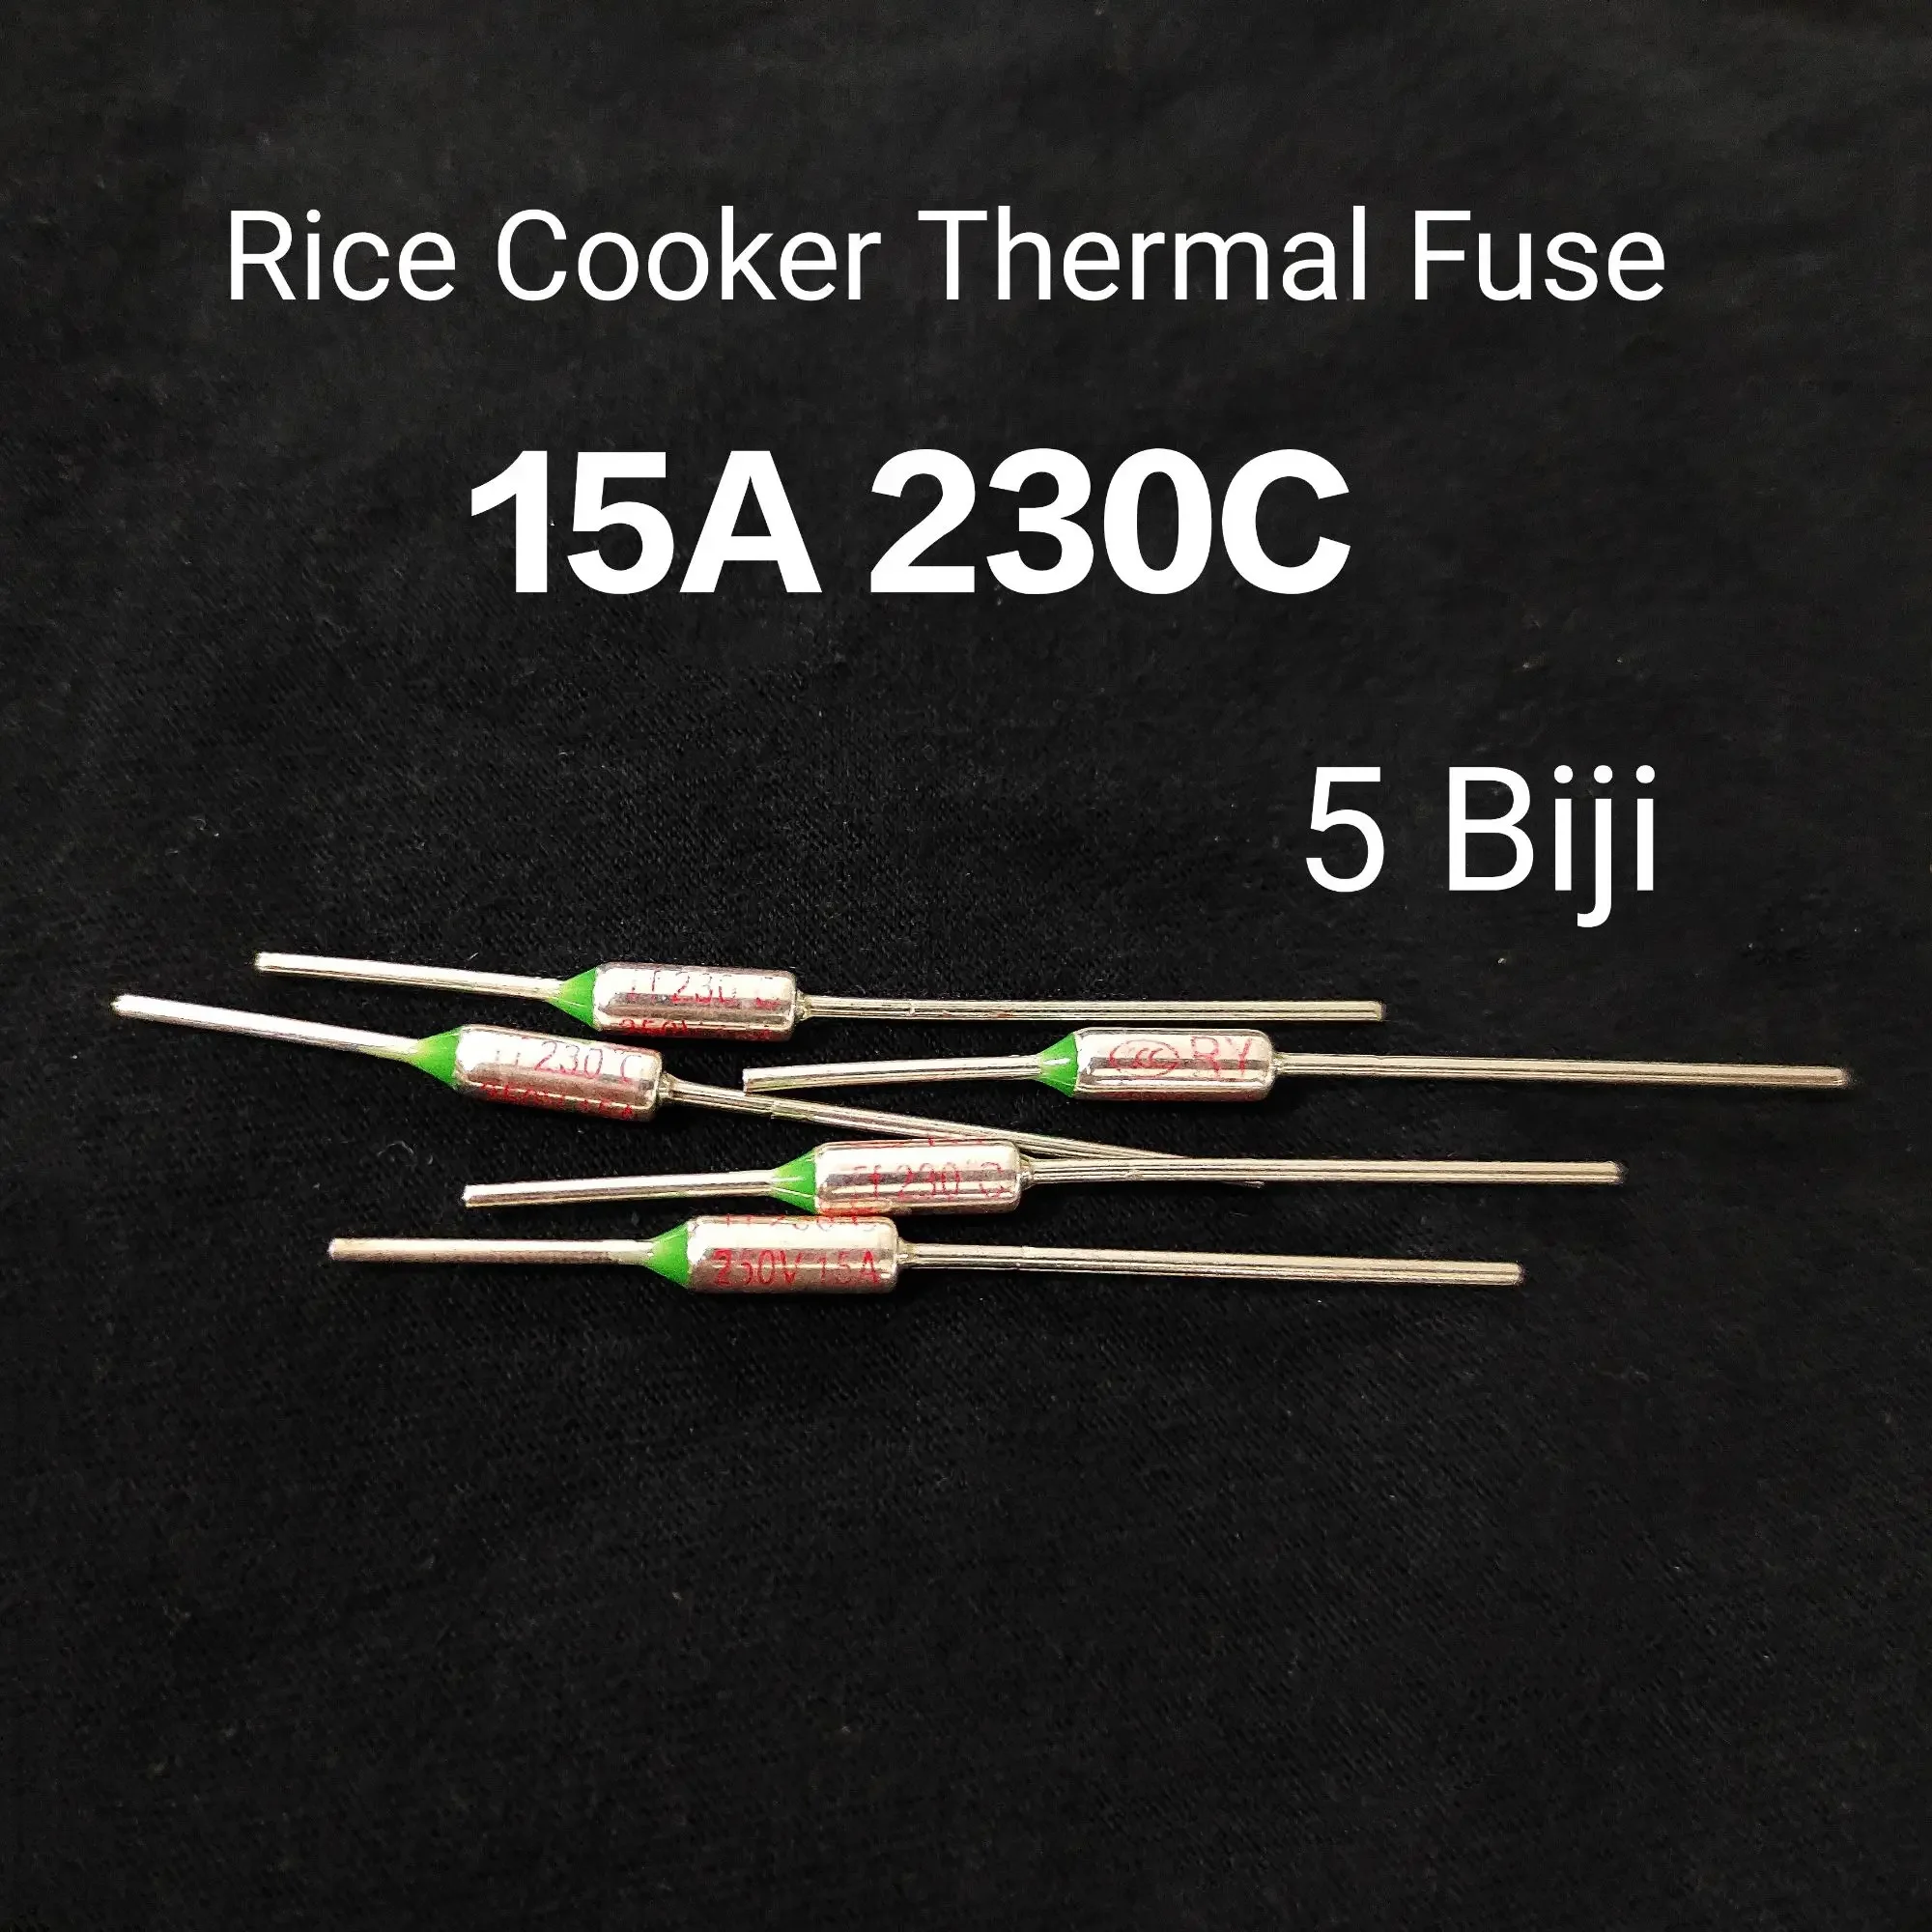 5 Biji 15A 230C 250V Rice Cooker Thermal Fuse 15a 229c Thermo fuse